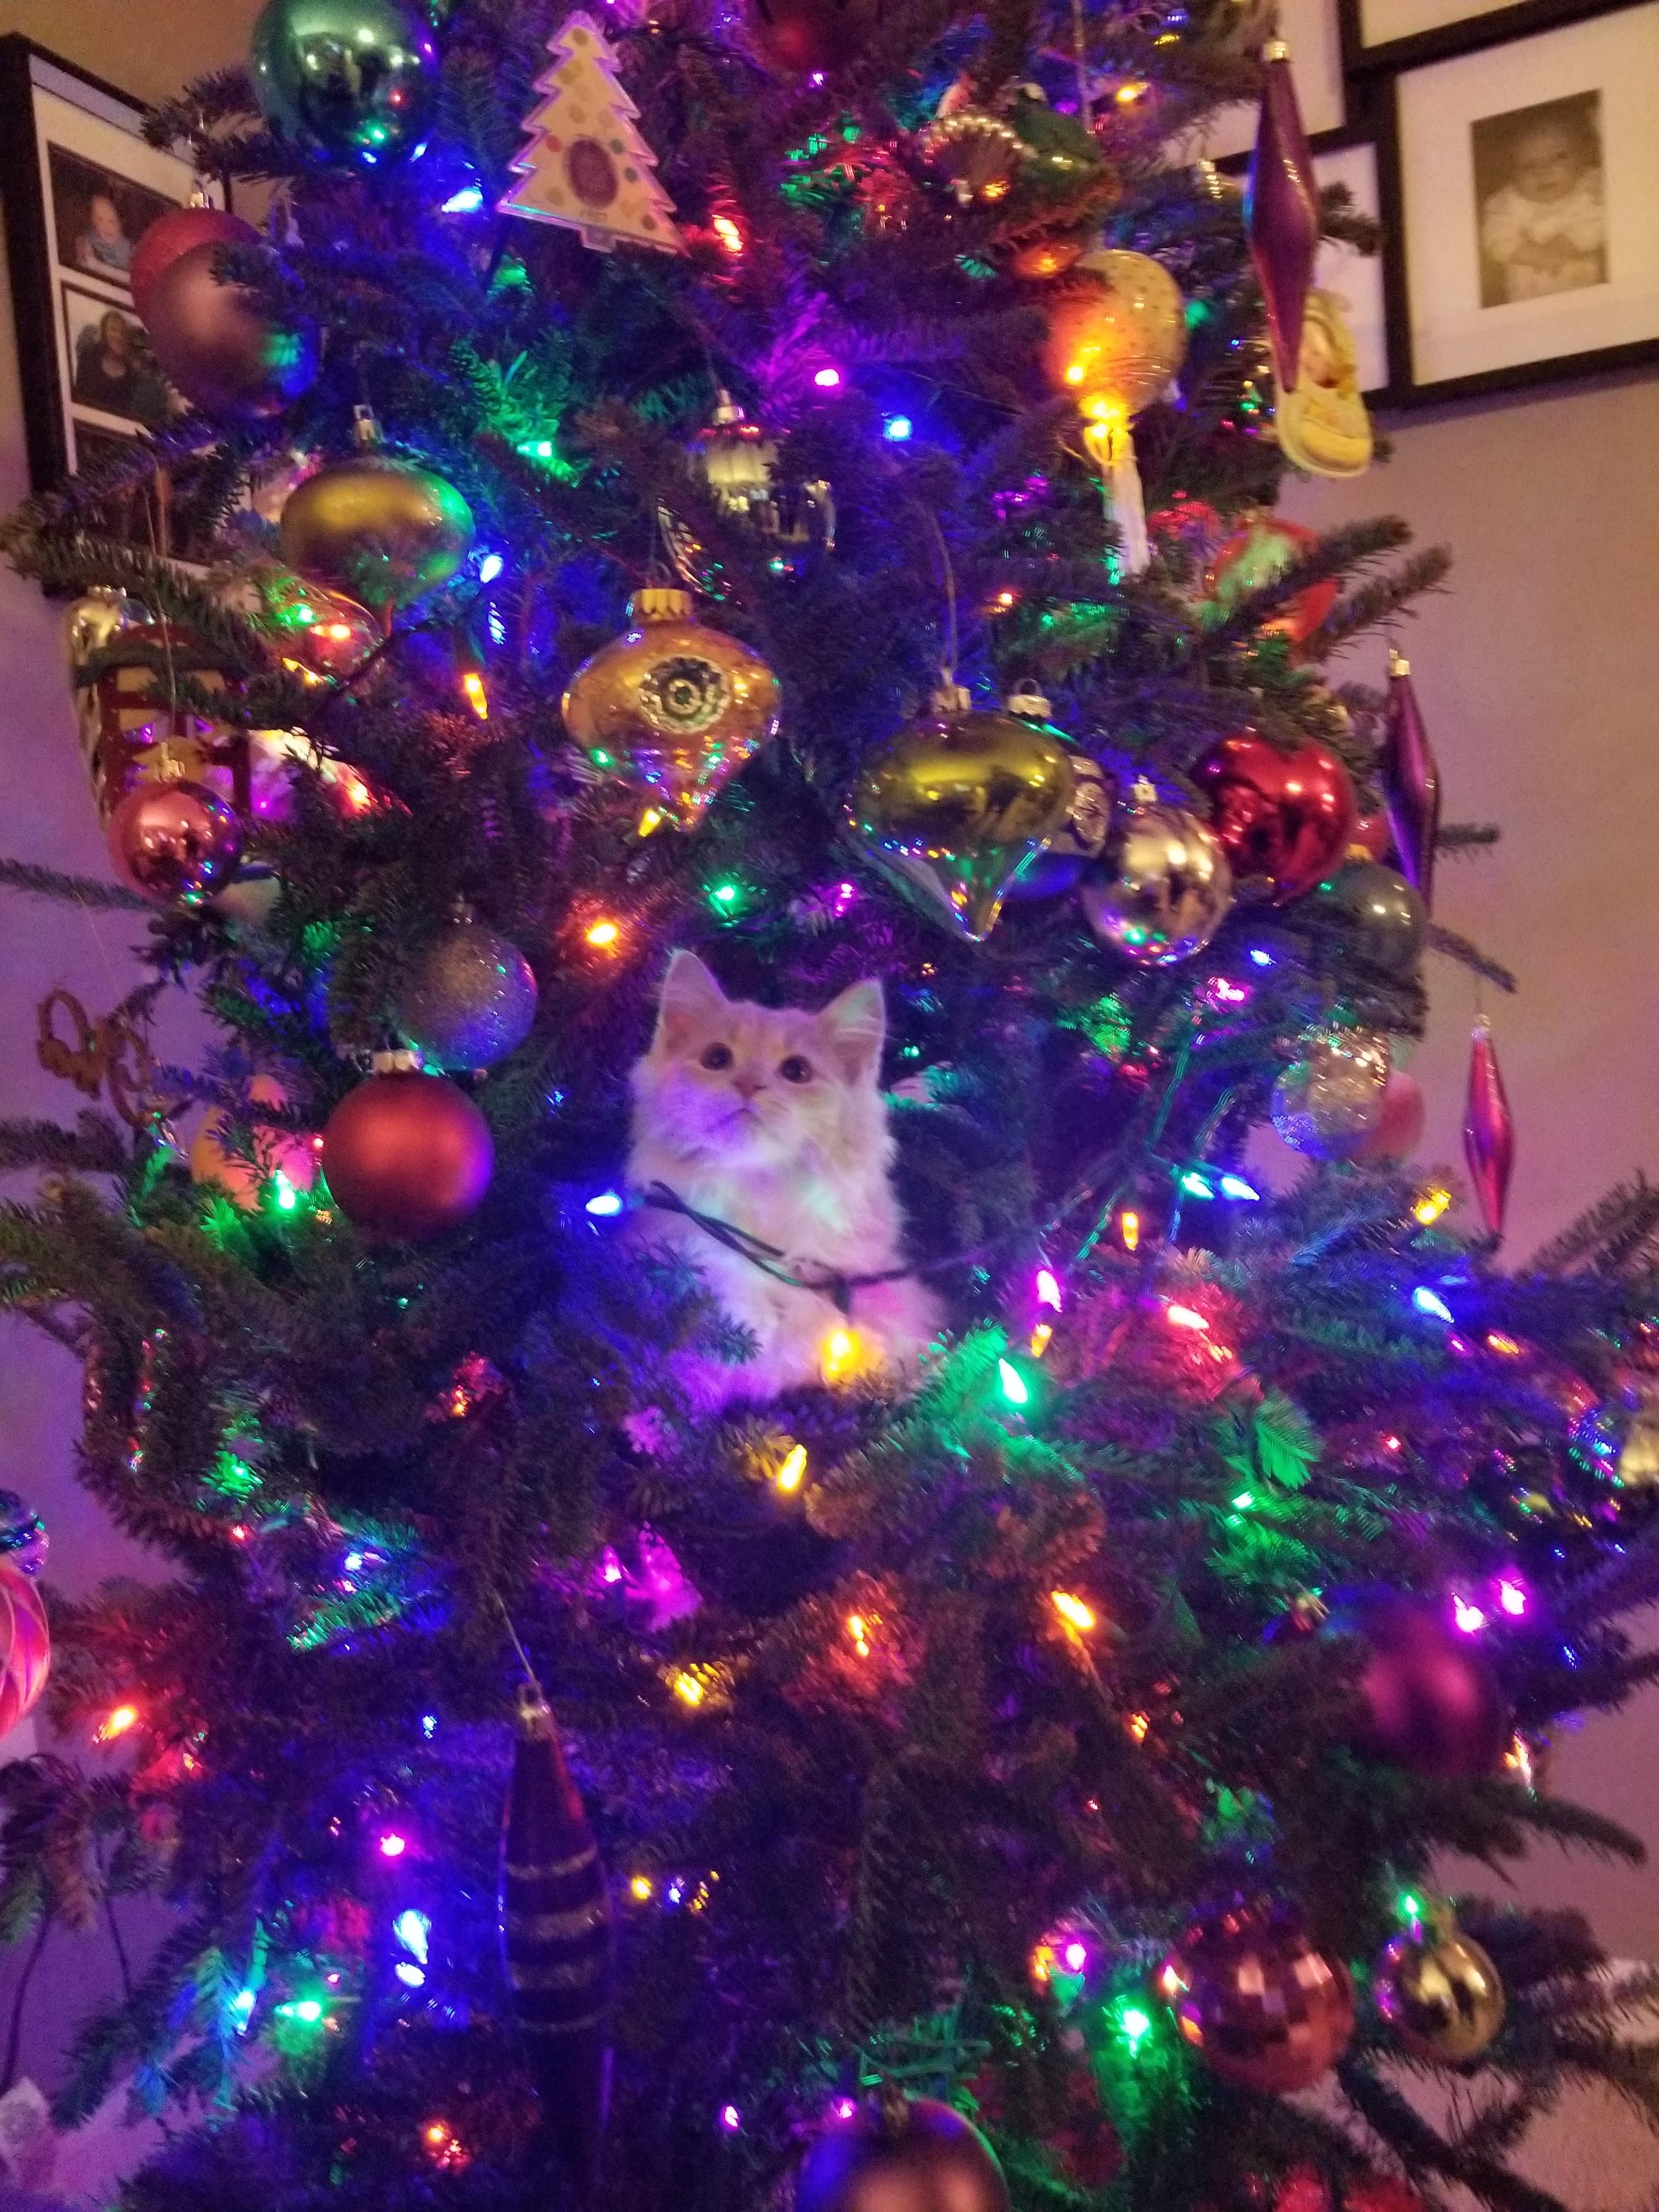 So our new kitten loves our tree I guess...